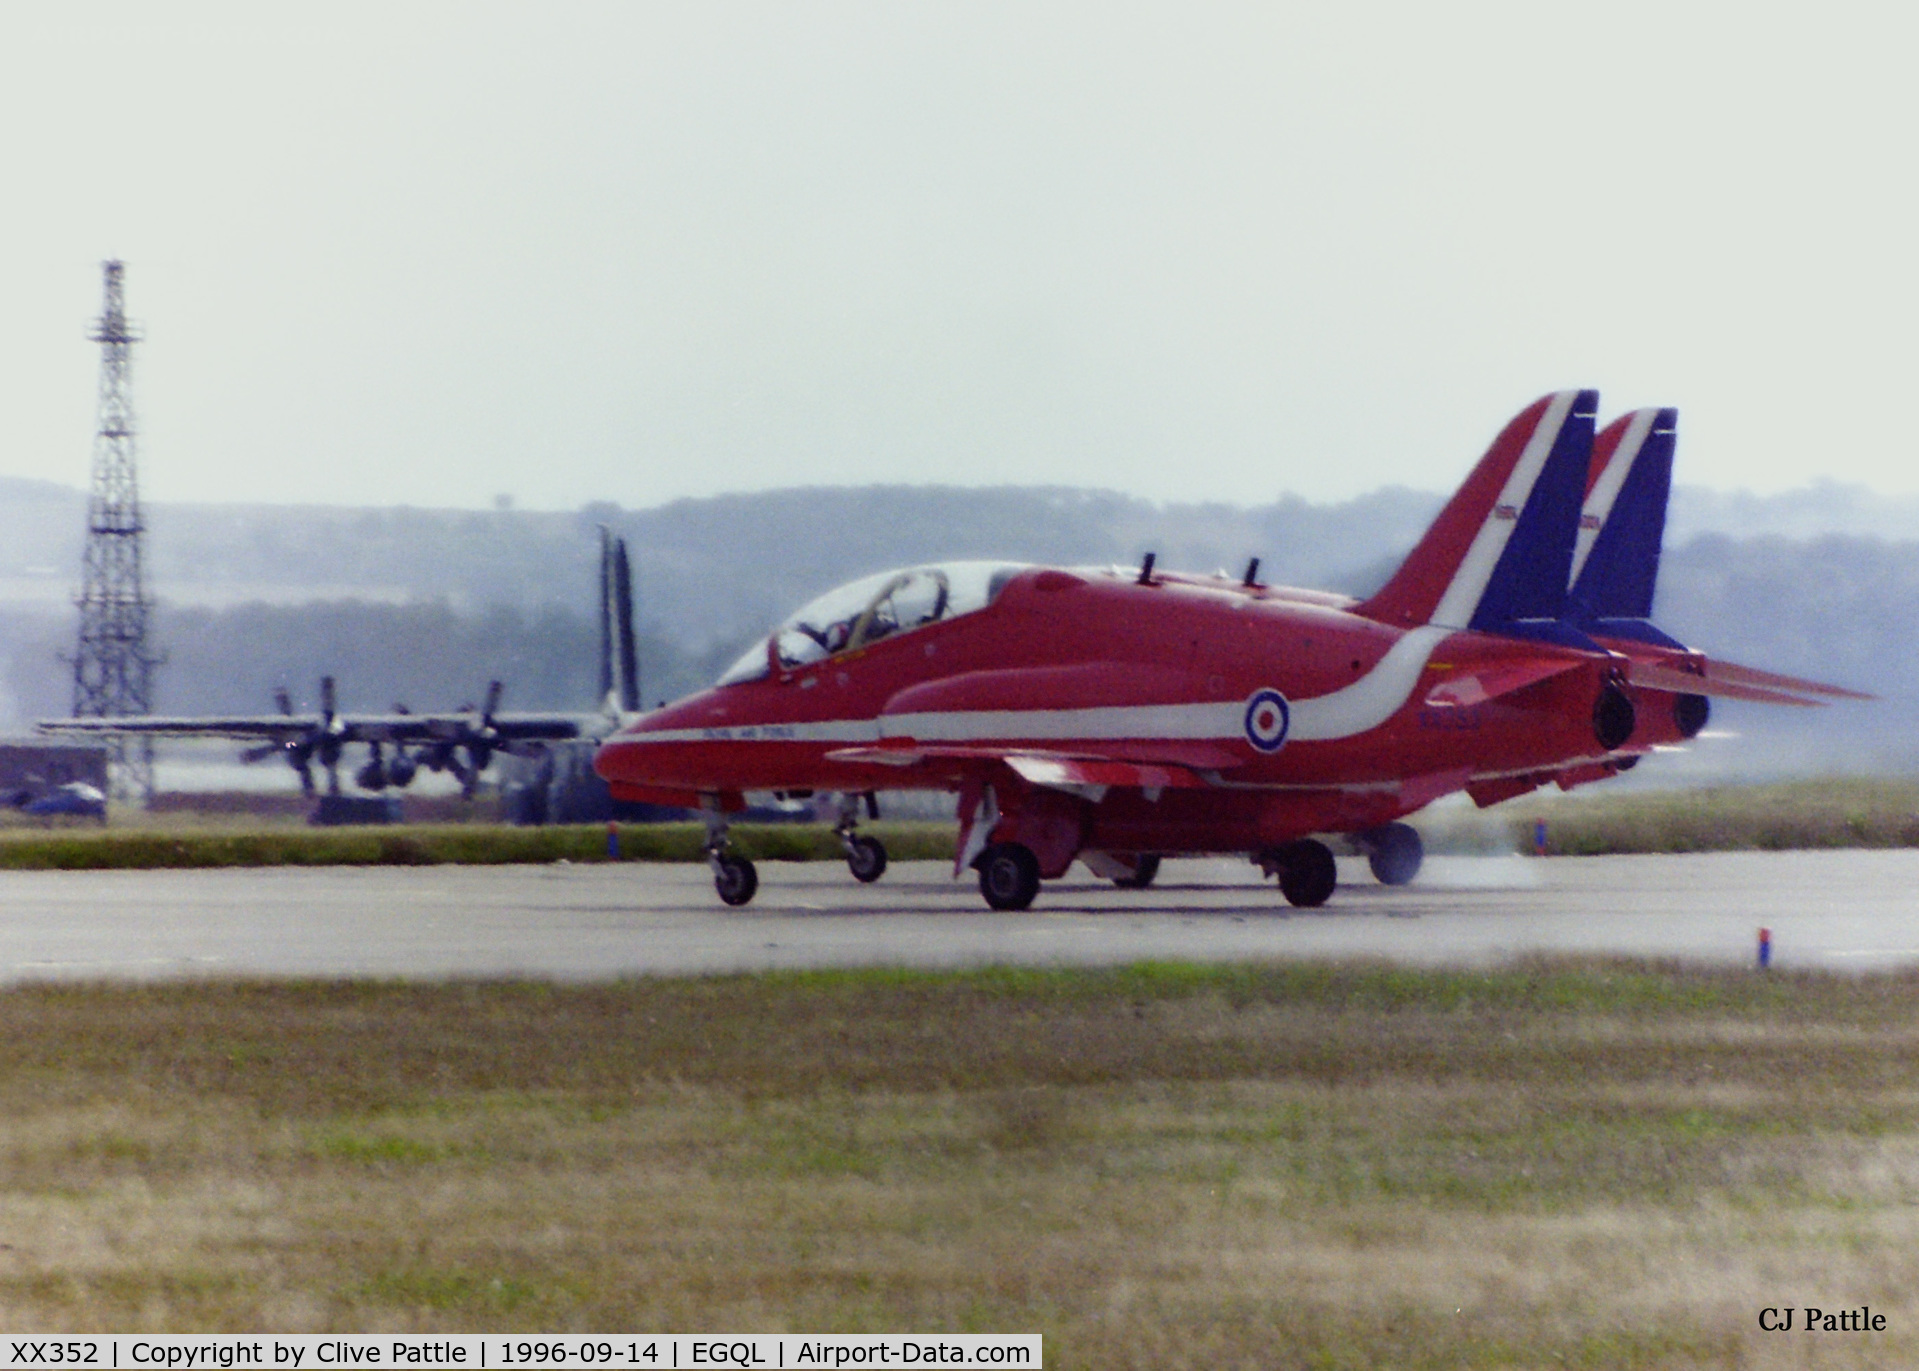 XX352, 1981 Hawker Siddeley Hawk T.1A C/N 202/312176, Red Arrows dual take-off from RAF Leuchars during the airshow in 1996. XX352 is nearest the camera.